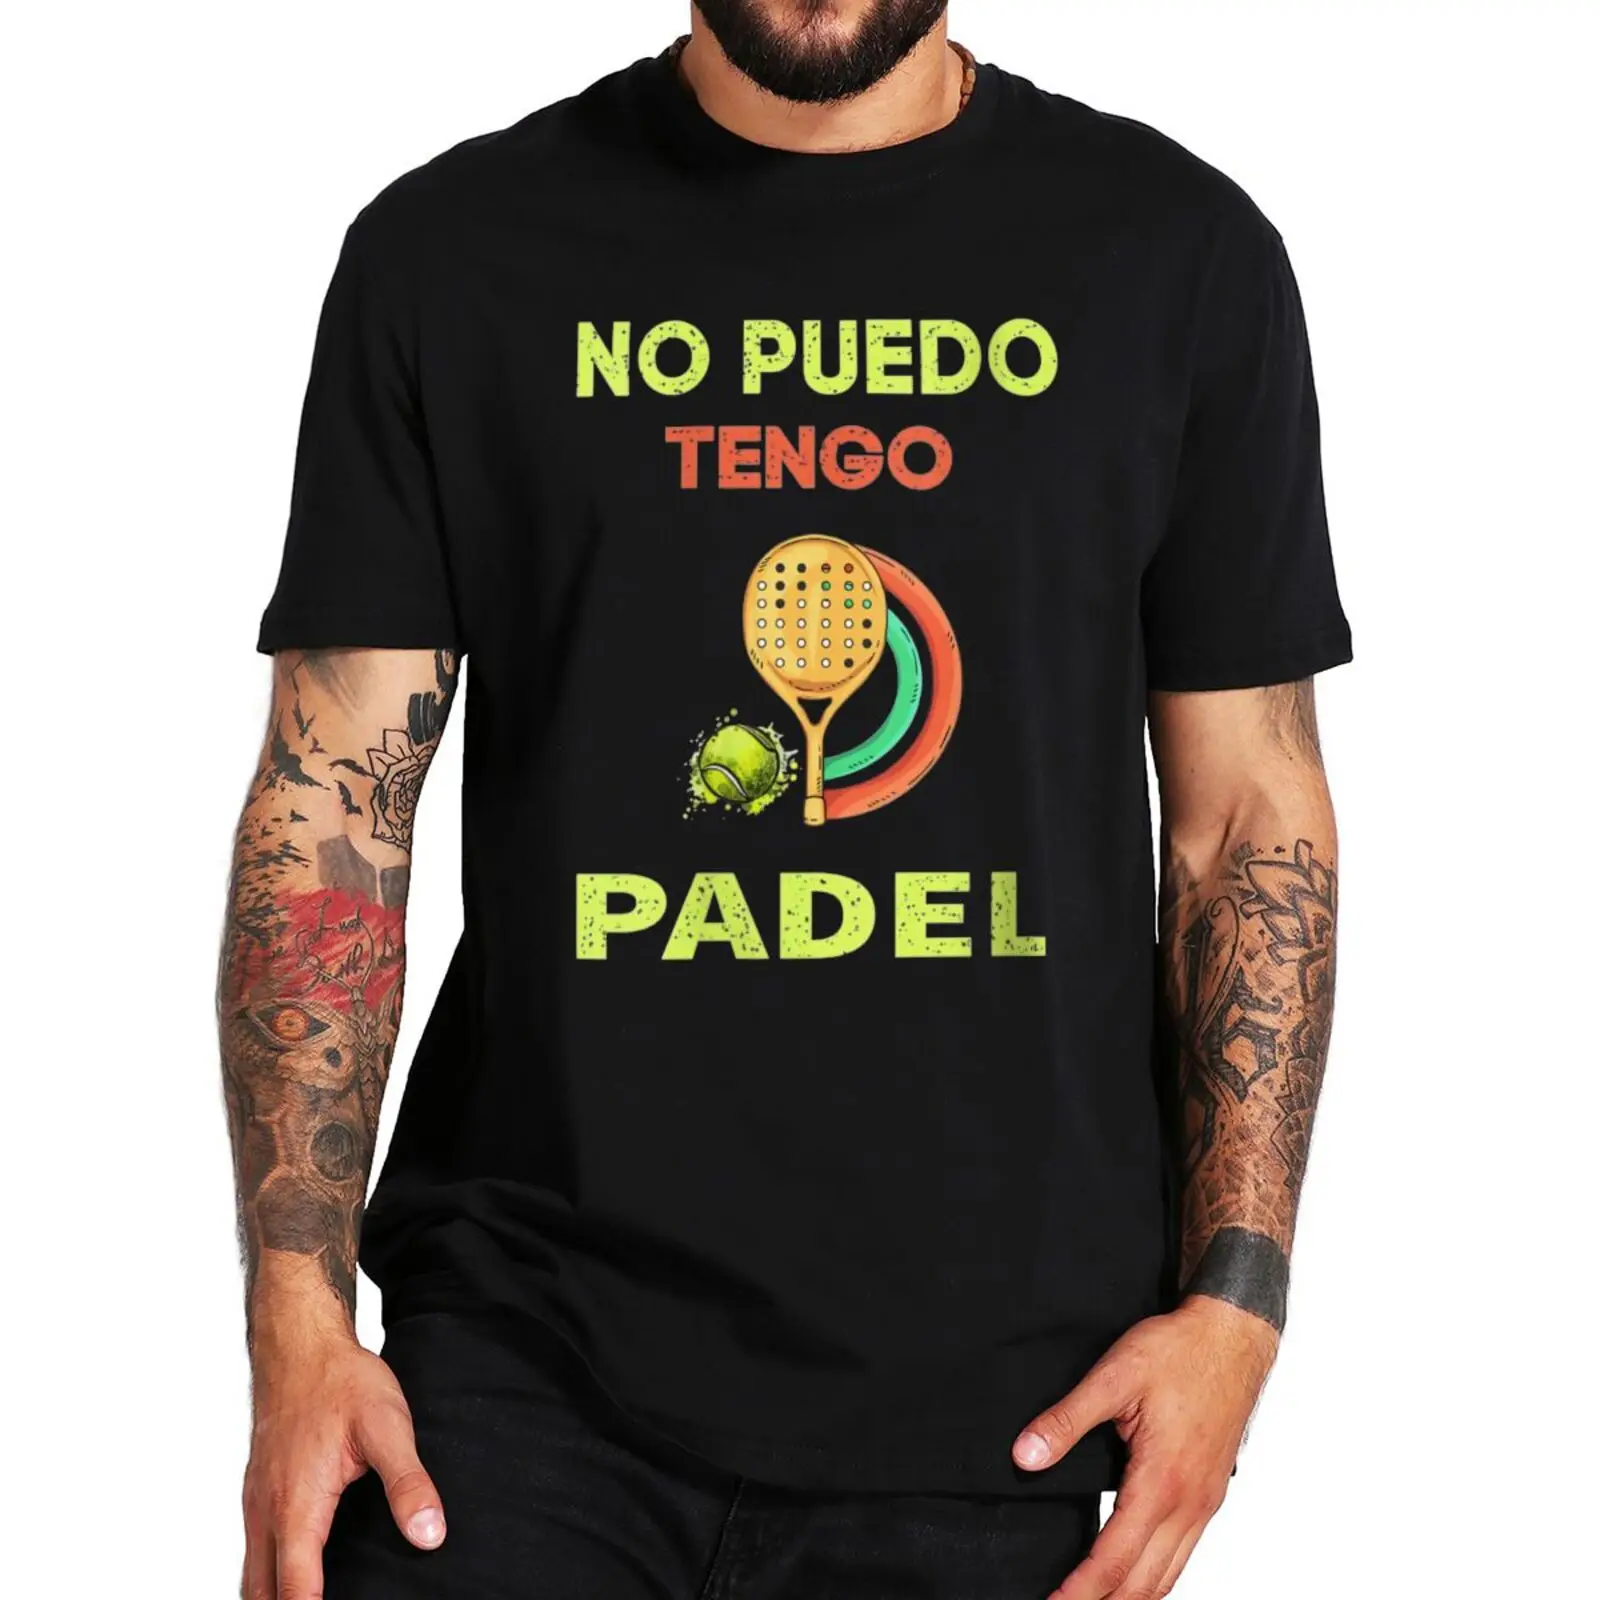 Vintage I Can't I Have Padel And Tennis T-shirt Funny Sports Balls Lovers Retro Tee Top EU Size Summer Cotton Men Women T Shirt